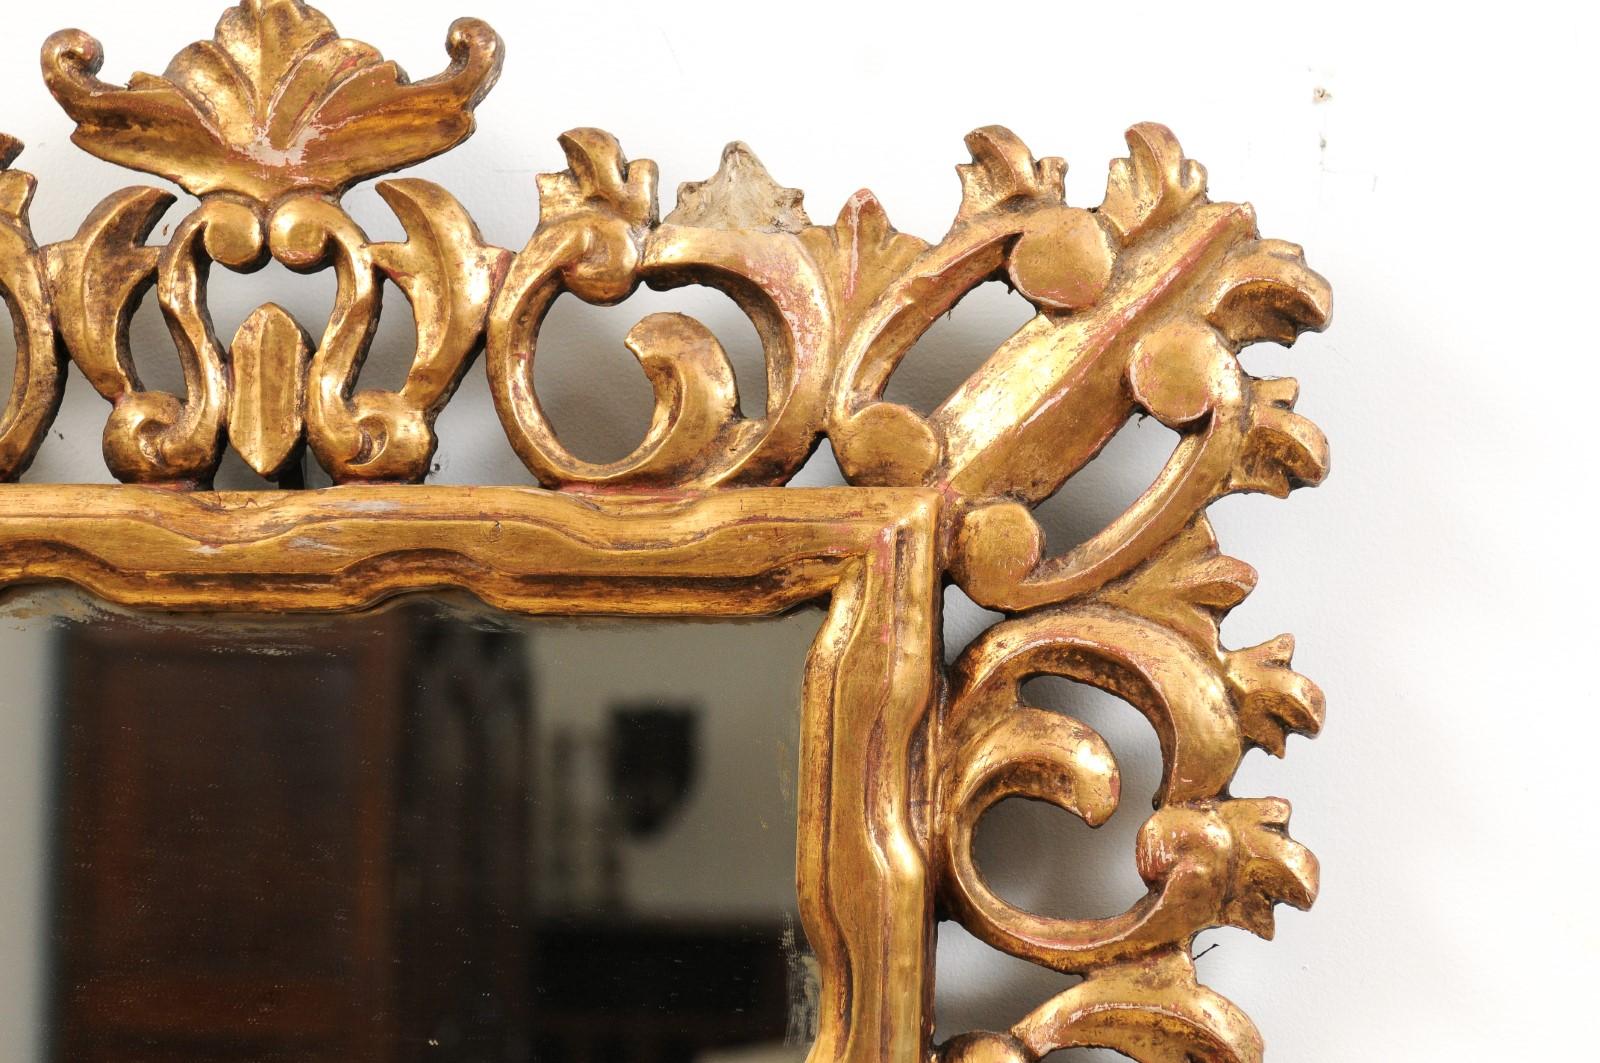 Florentine 20th Century Carved Giltwood Mirror with C-Scrolls and Foliage Motifs For Sale 2